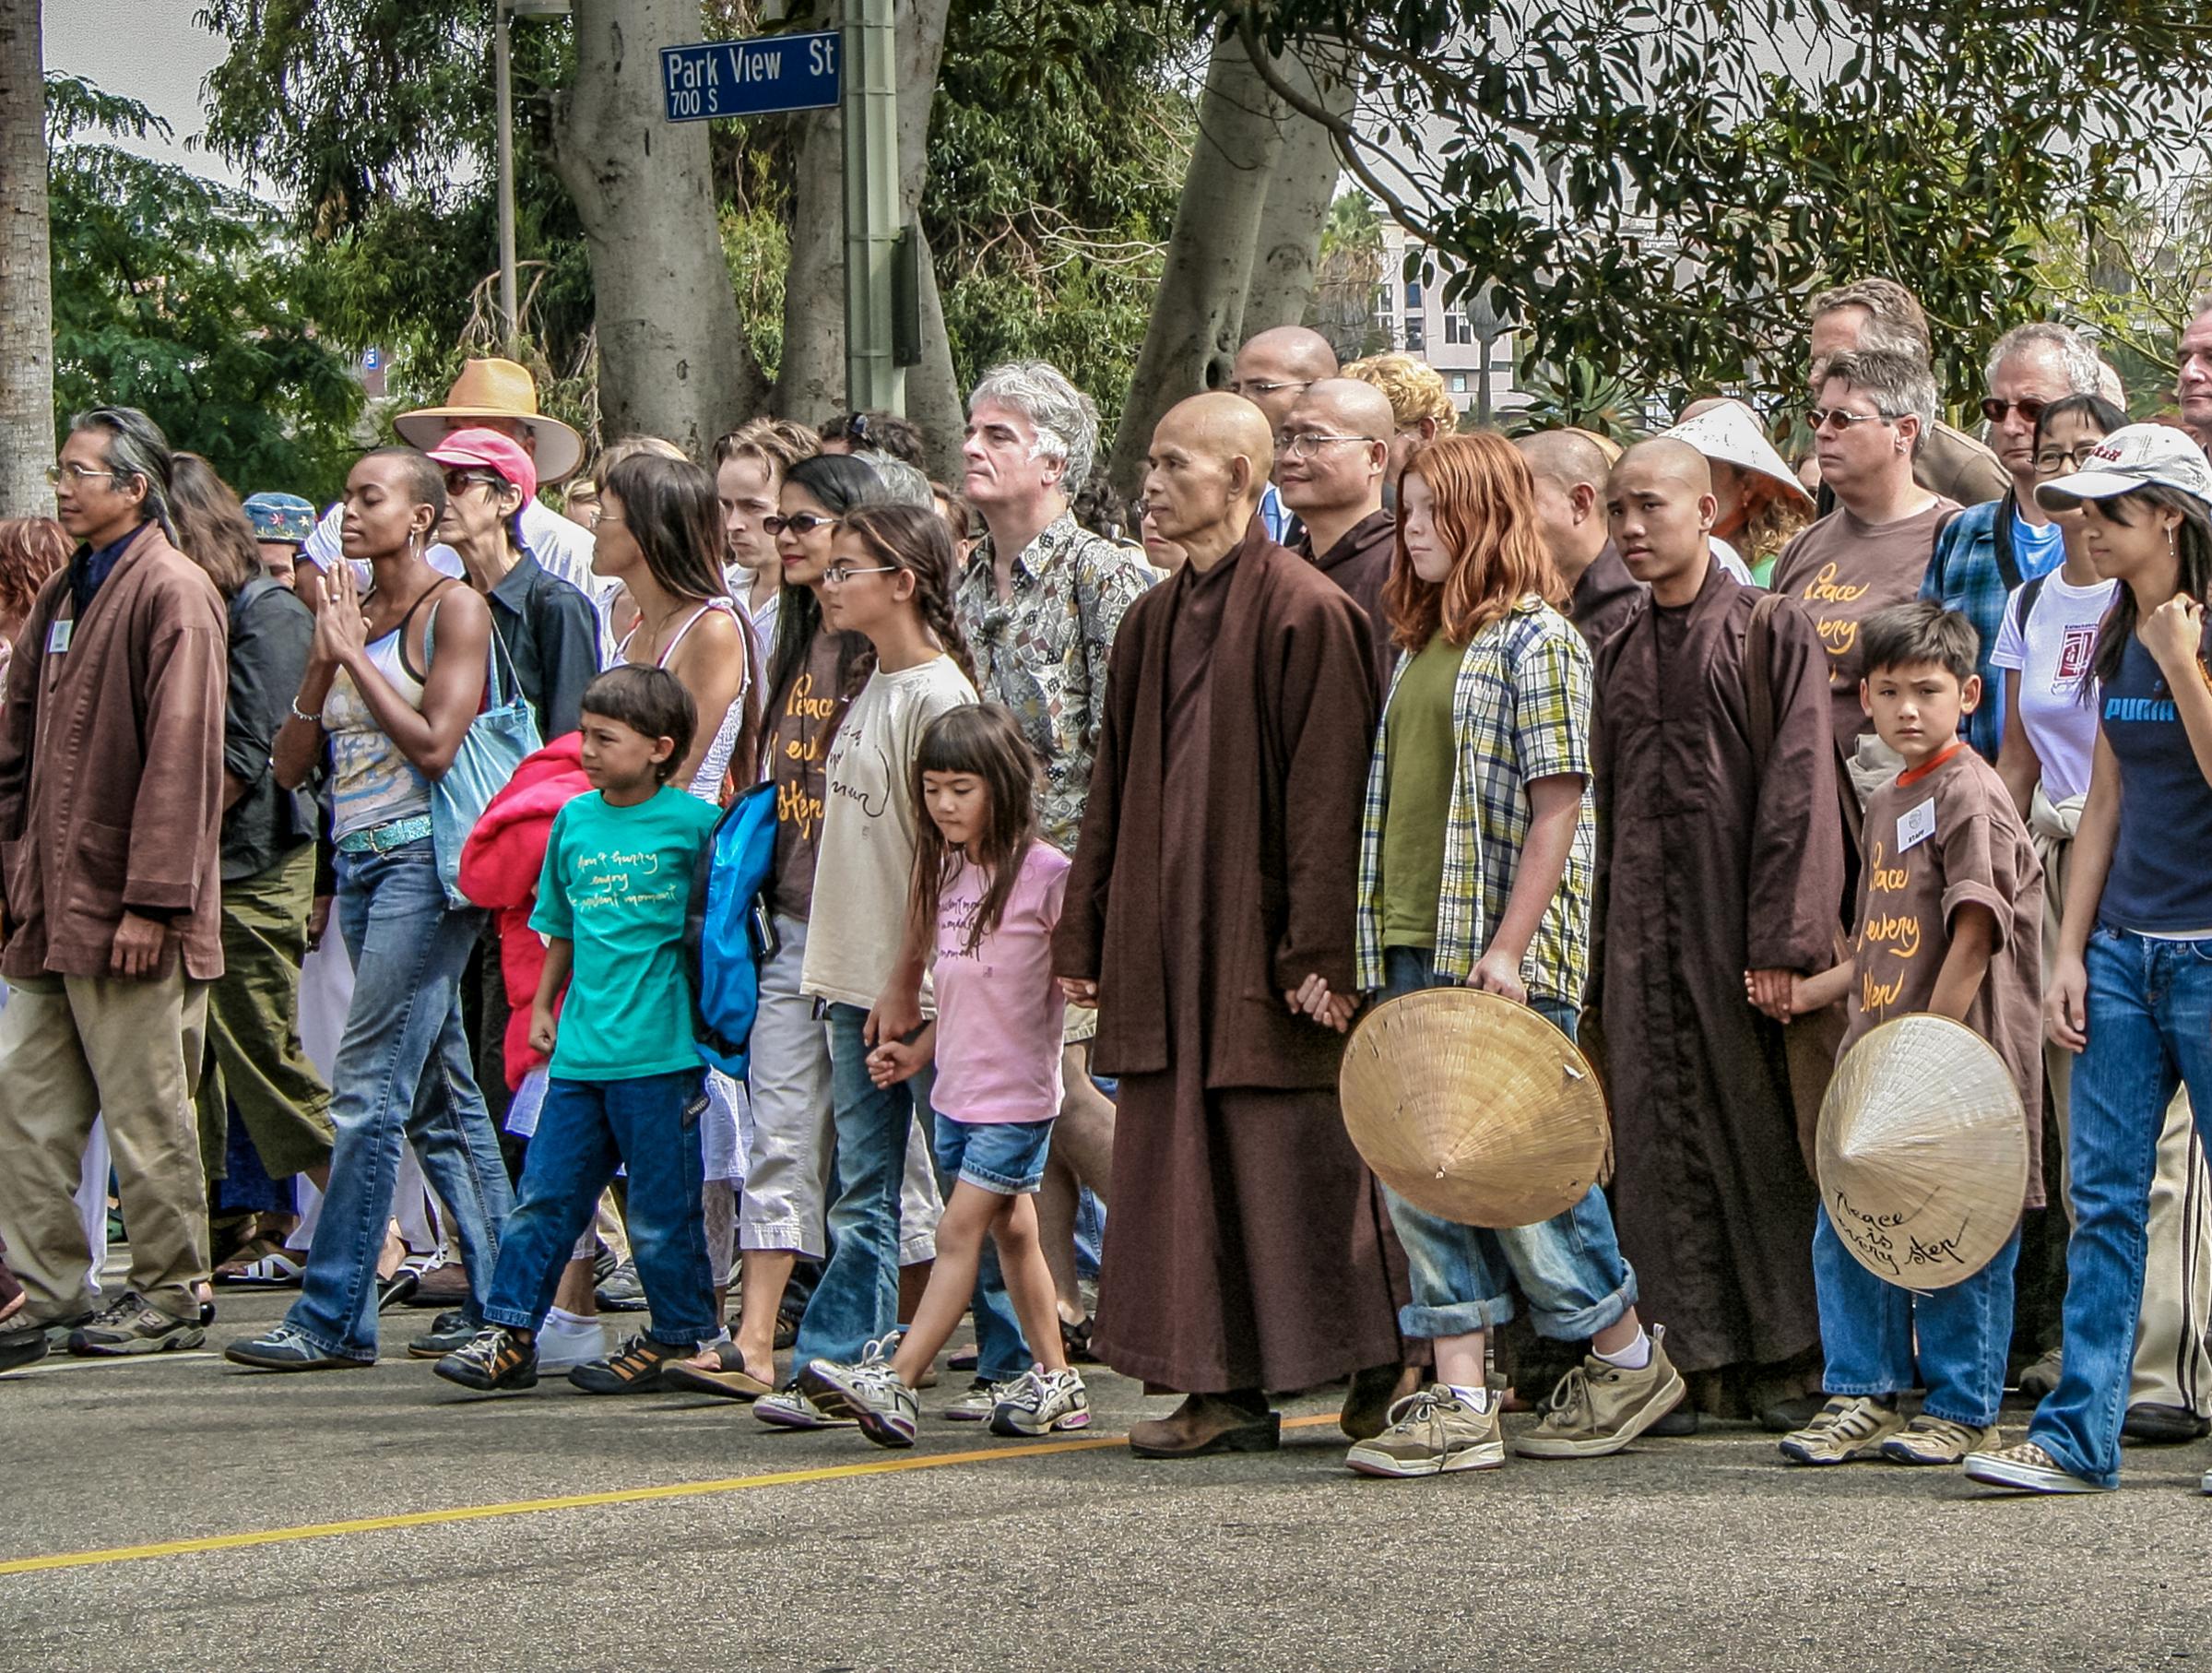 Nhat Hanh, center, led a silent peace walk in Los Angeles in 2005, as the Iraq War escalated